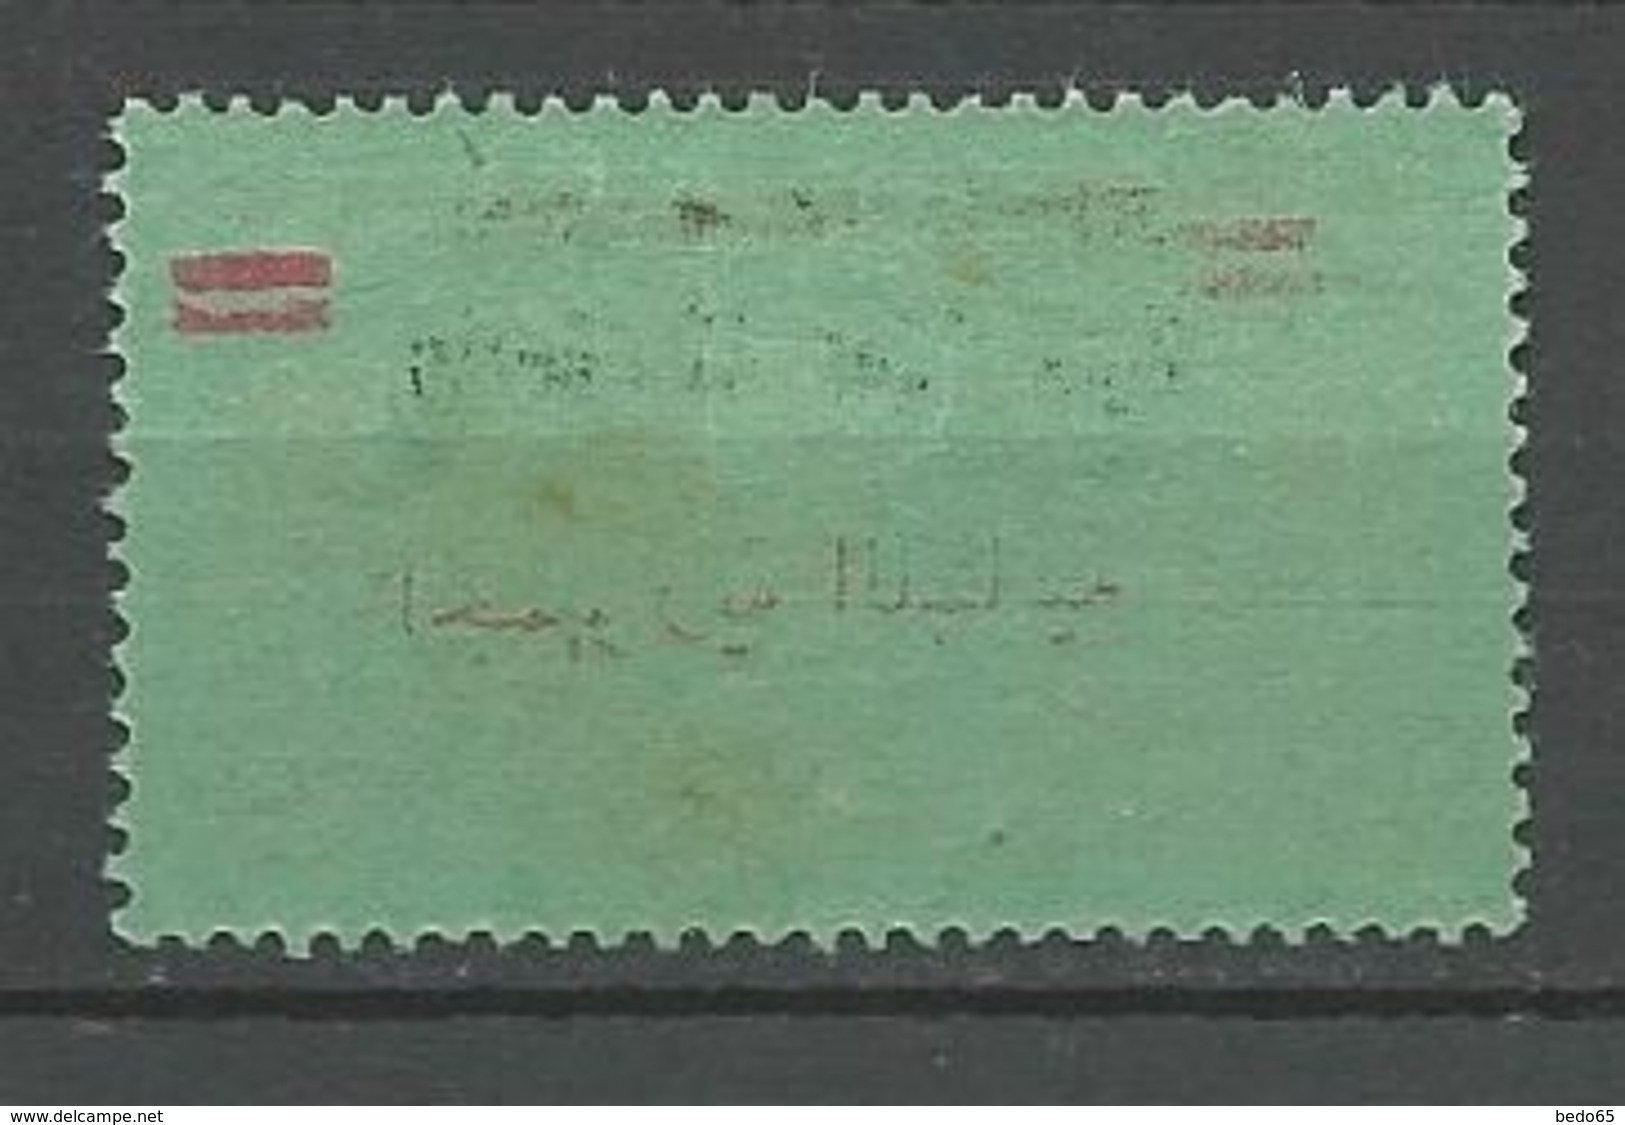 GRAND LIBAN TAXE Surcharge Rouge Vrecto Verso N° 25 NEUF* TRACE DE CHARNIERE / MH - Postage Due